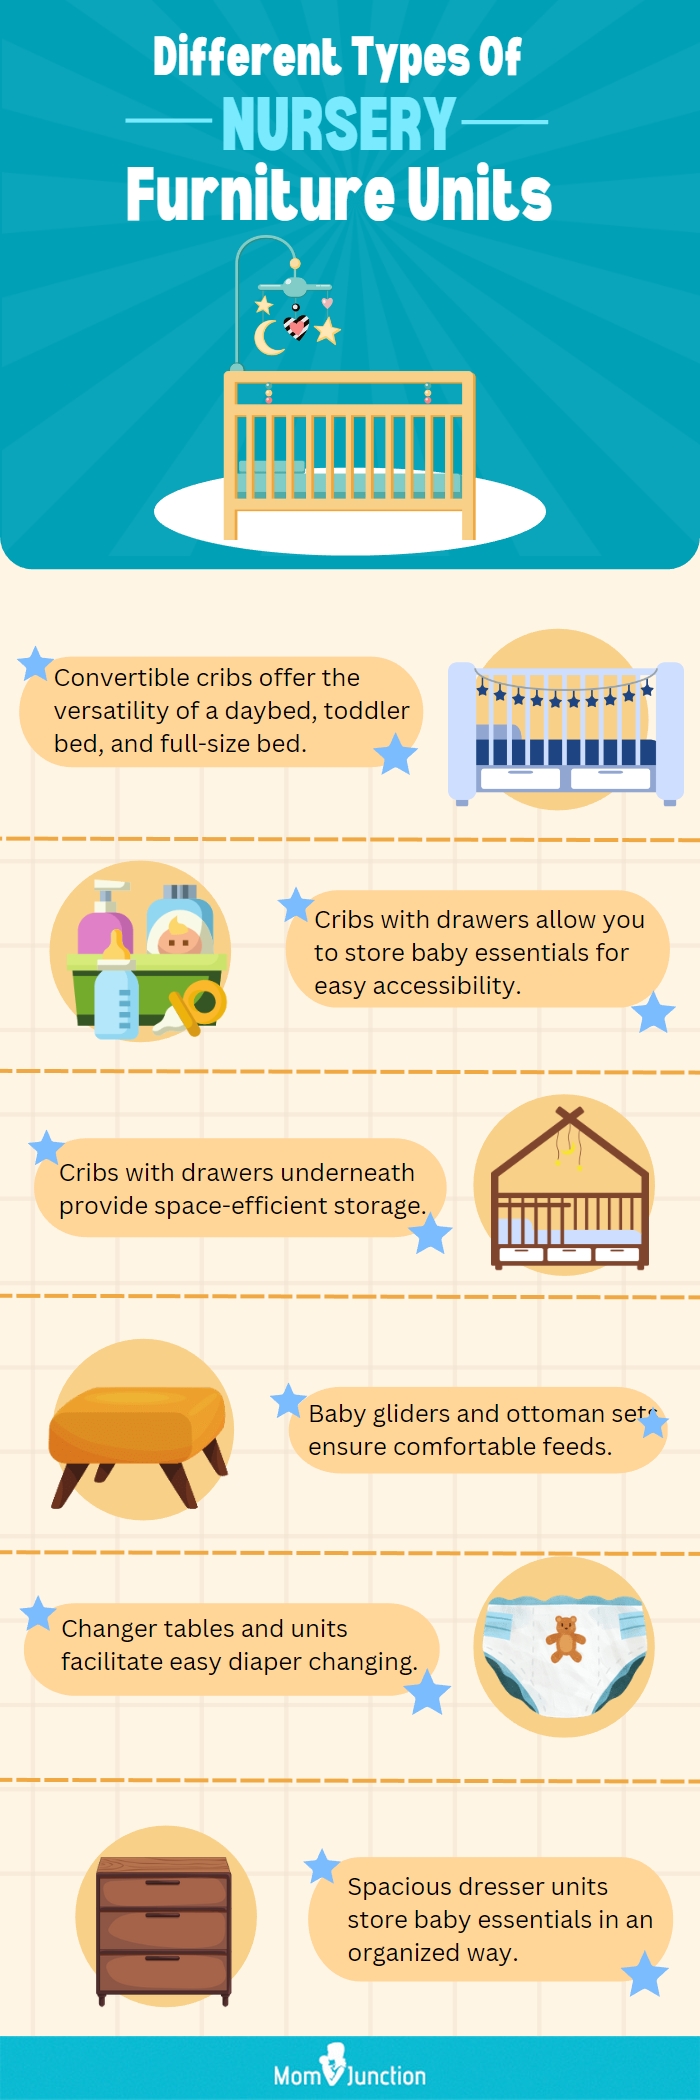 Different Types Of Nursery Furniture Units(infographic)